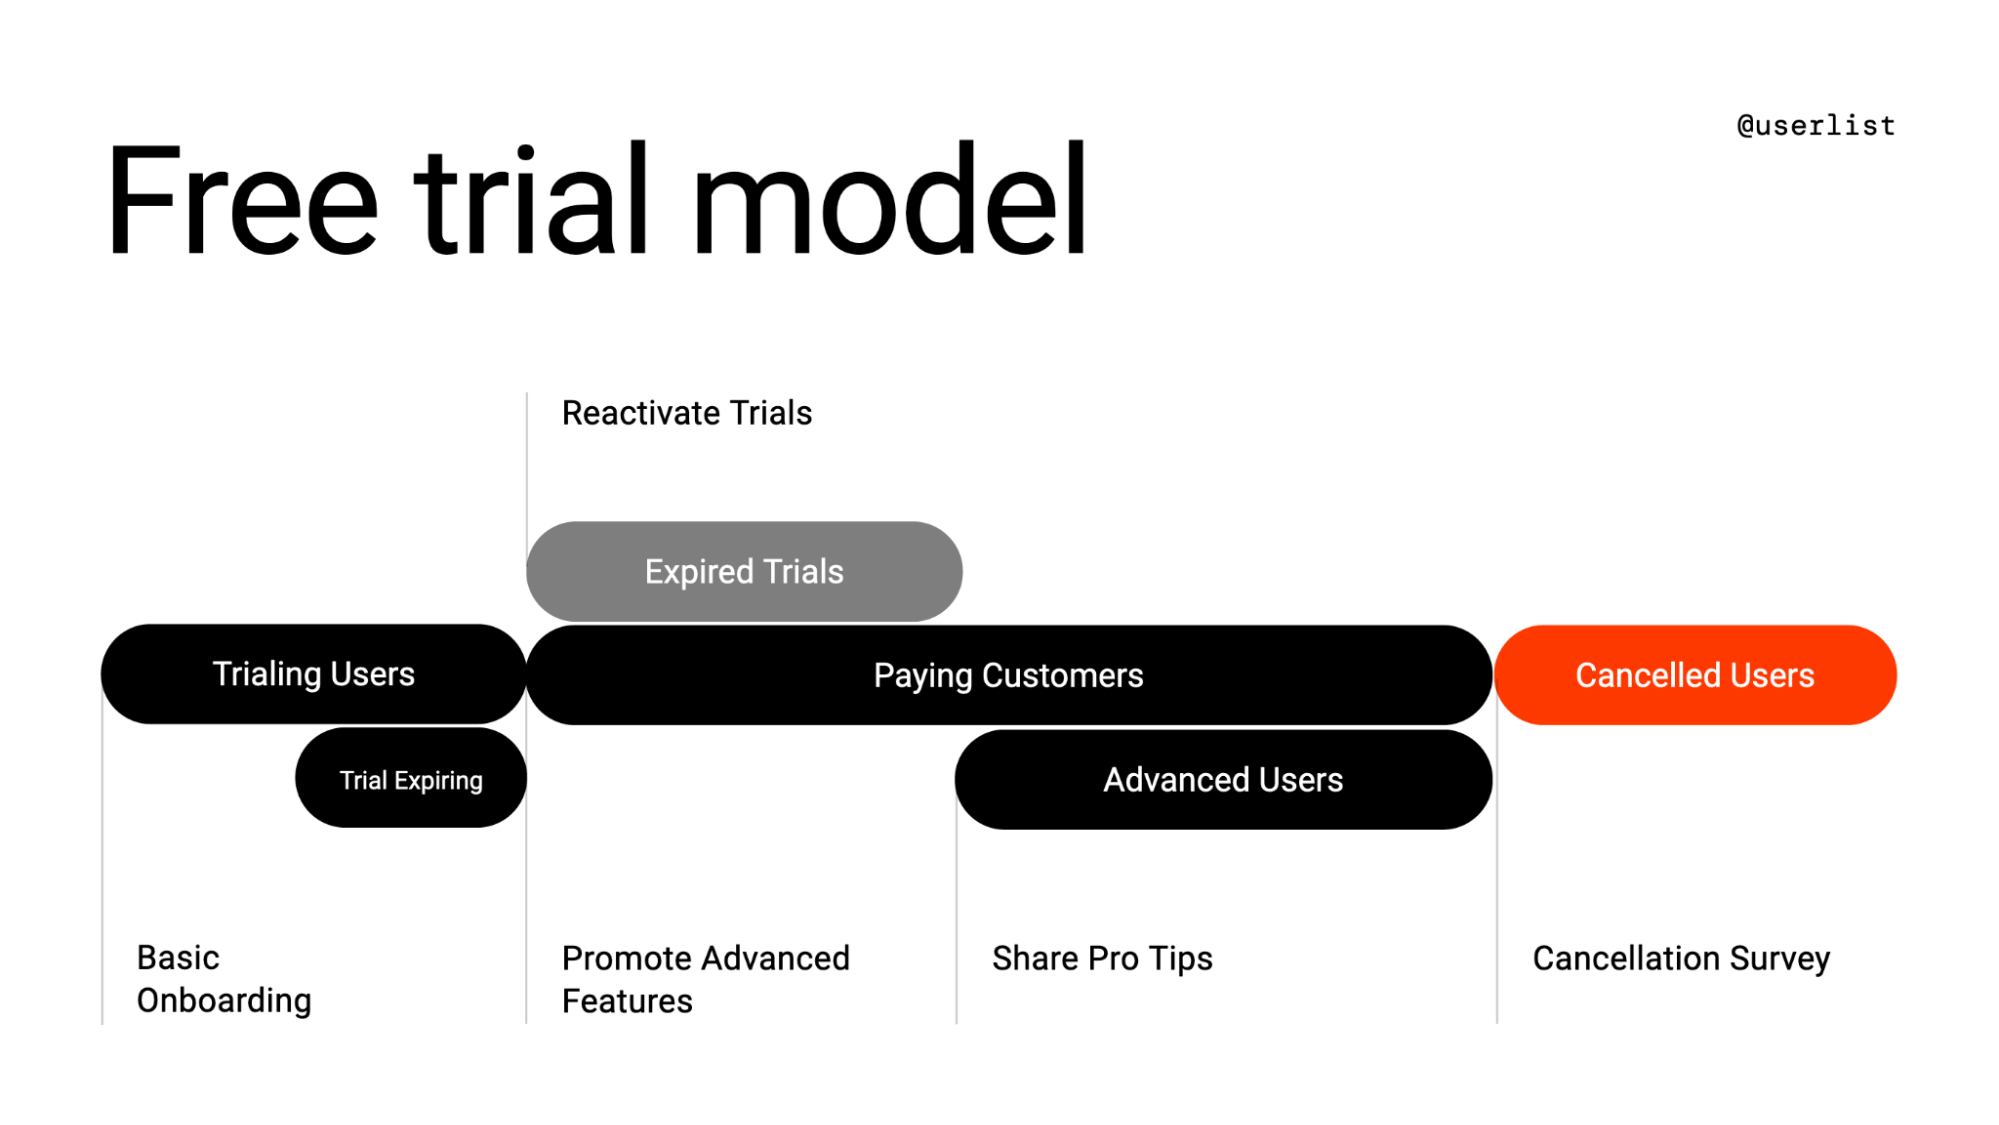 SaaS User Onboarding Guide: A segments map showing the free trial model